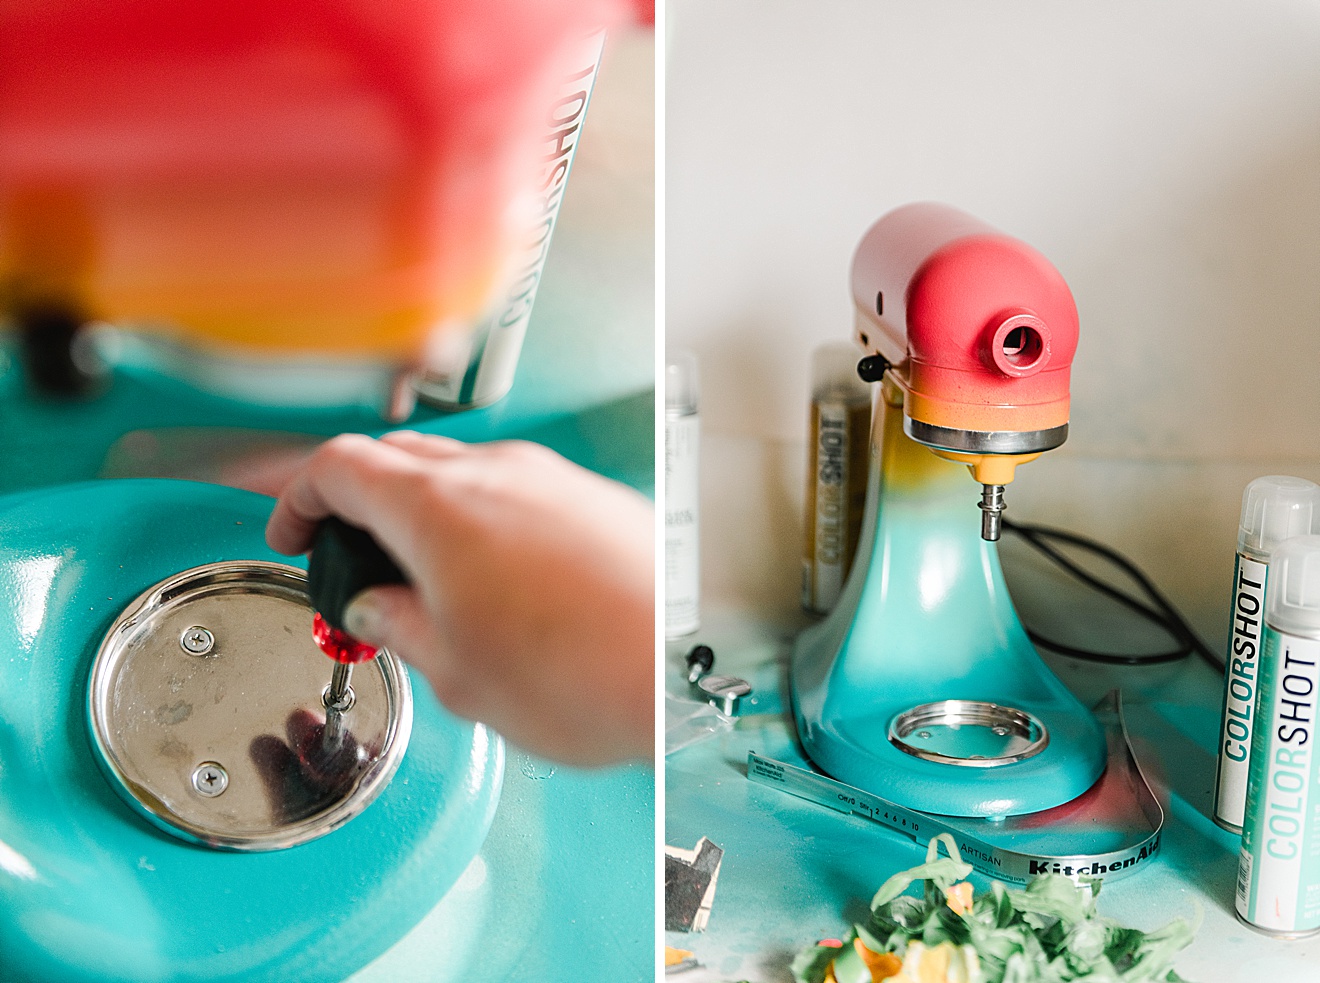 How to paint a stand up kitchenaid mixer, Kitchenaid painting, Painting a kitchenaid mixer, Paint a kitchenaid mixer, colorshot paint, colorshot spray paint